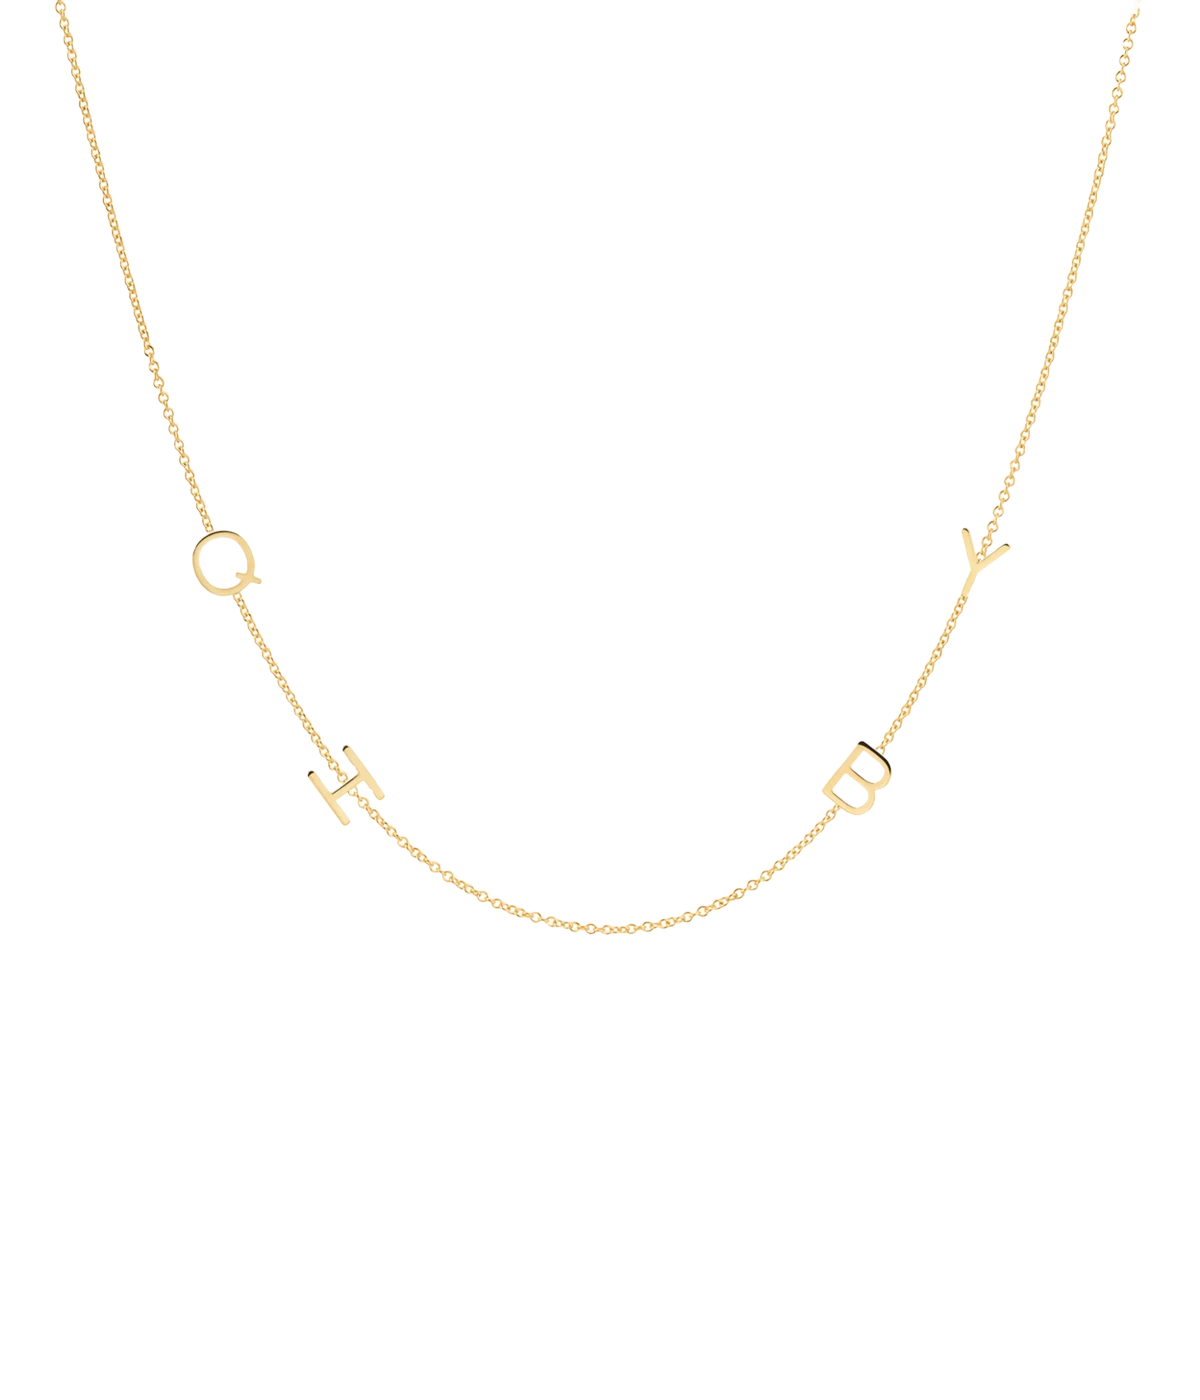 Image of a 42cm gold chain necklace, with customizable gold letters spaced throughout chain.  